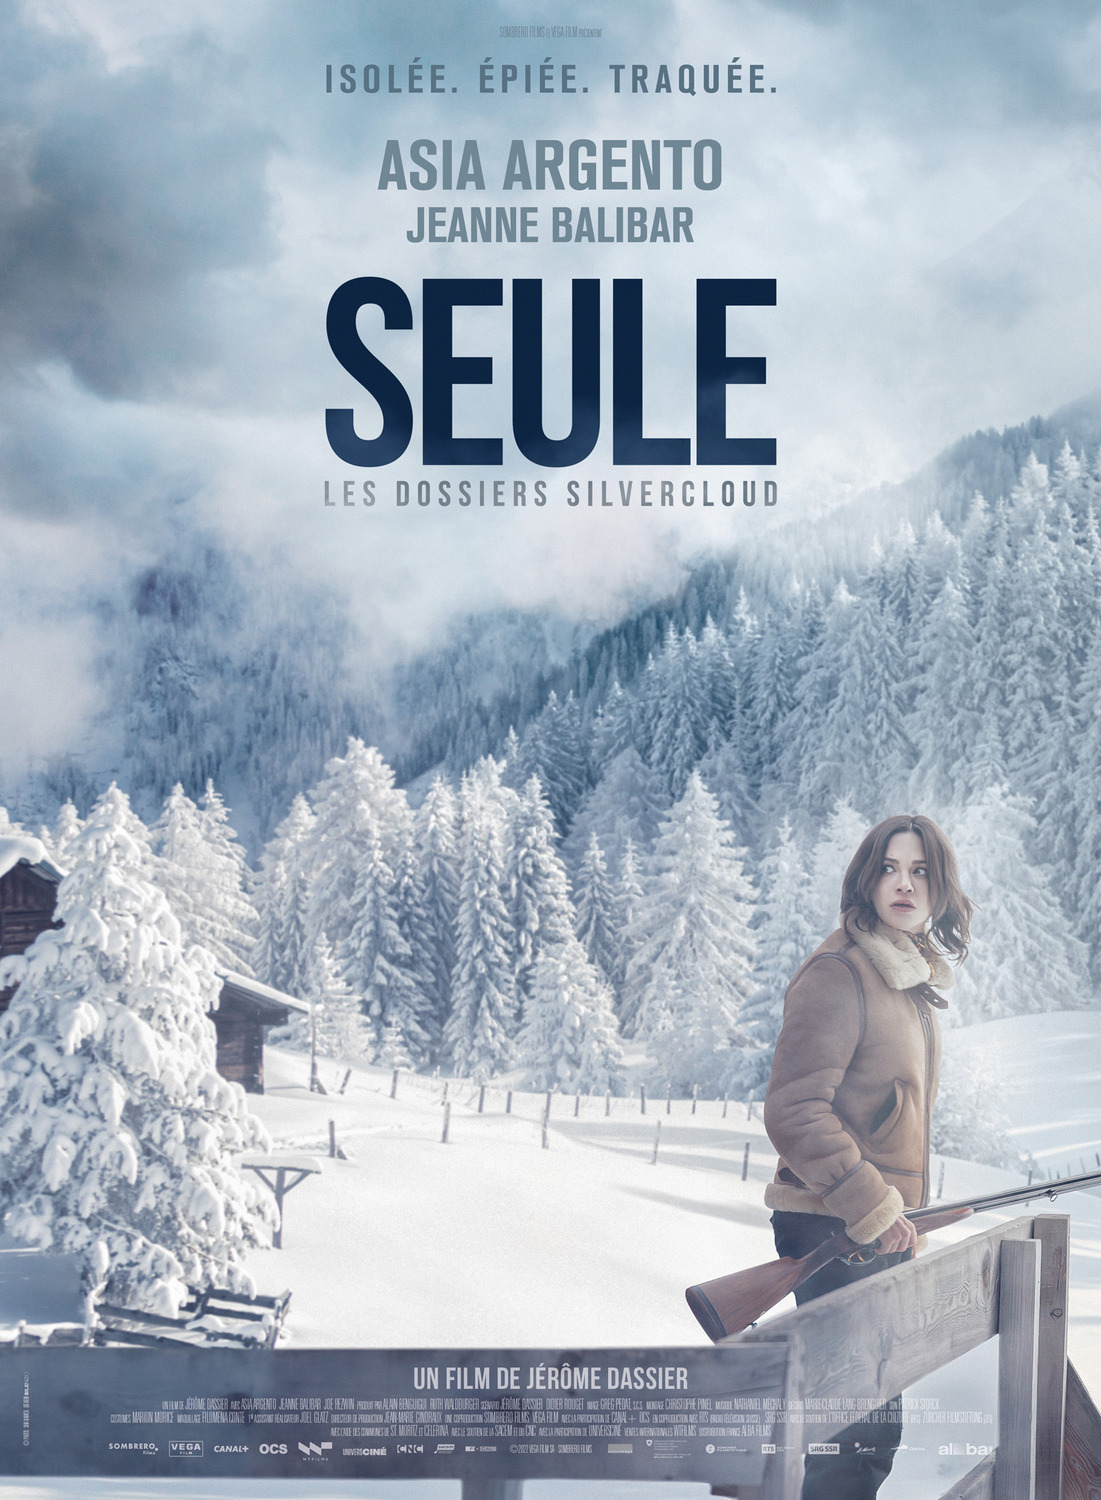 Extra Large Movie Poster Image for Seule: Les dossiers Silvercloud 